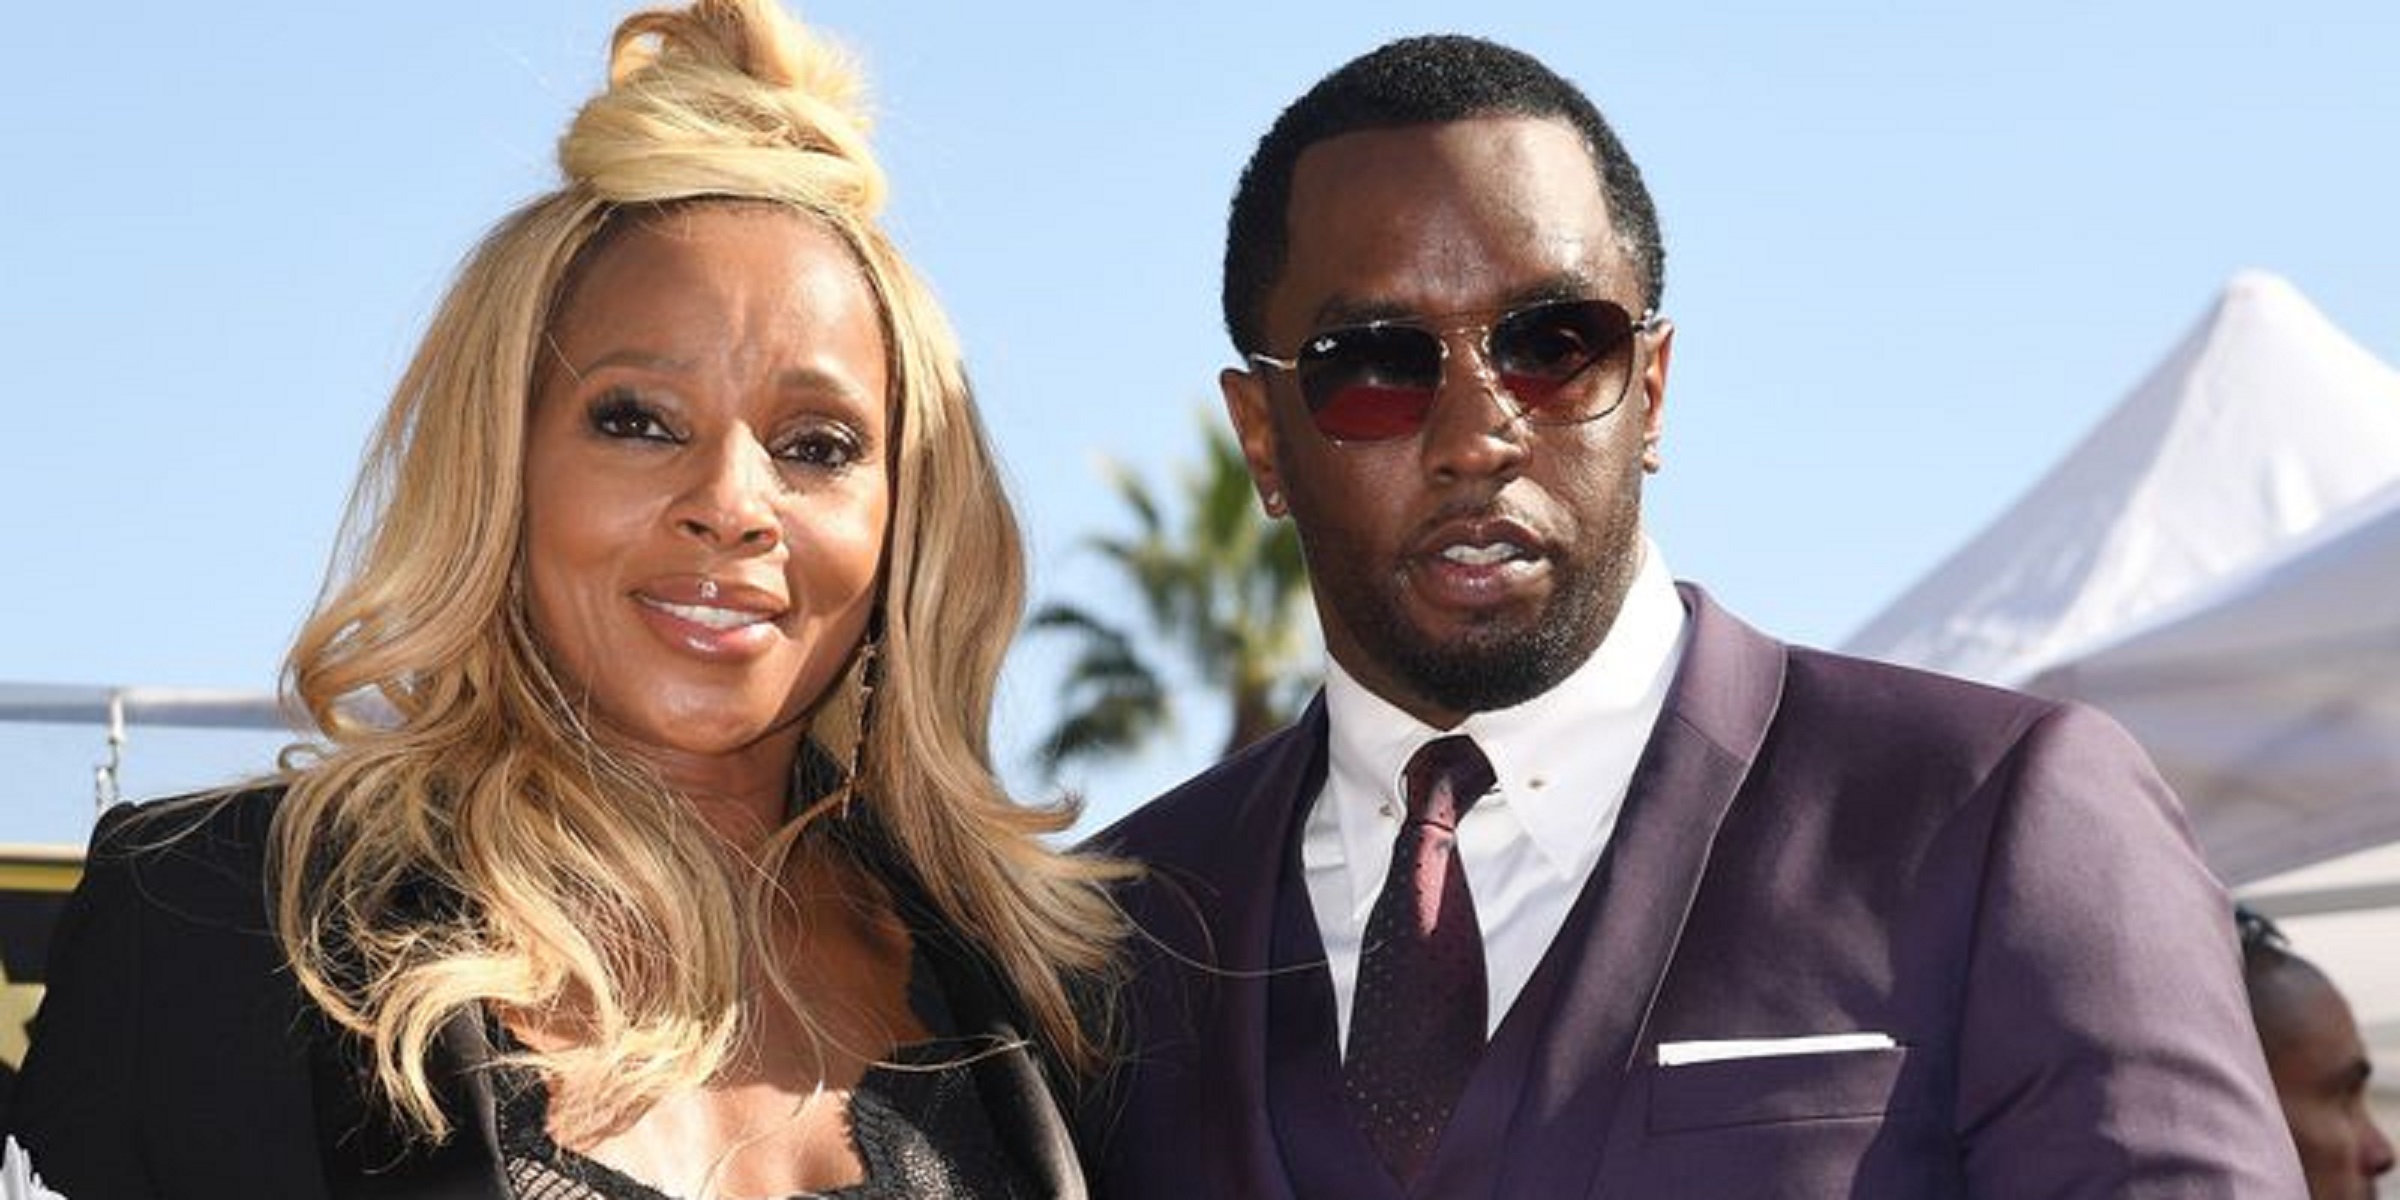 Mary J. Blige Has Partnered With Amazon For a Tell-All Documentary on Her Life